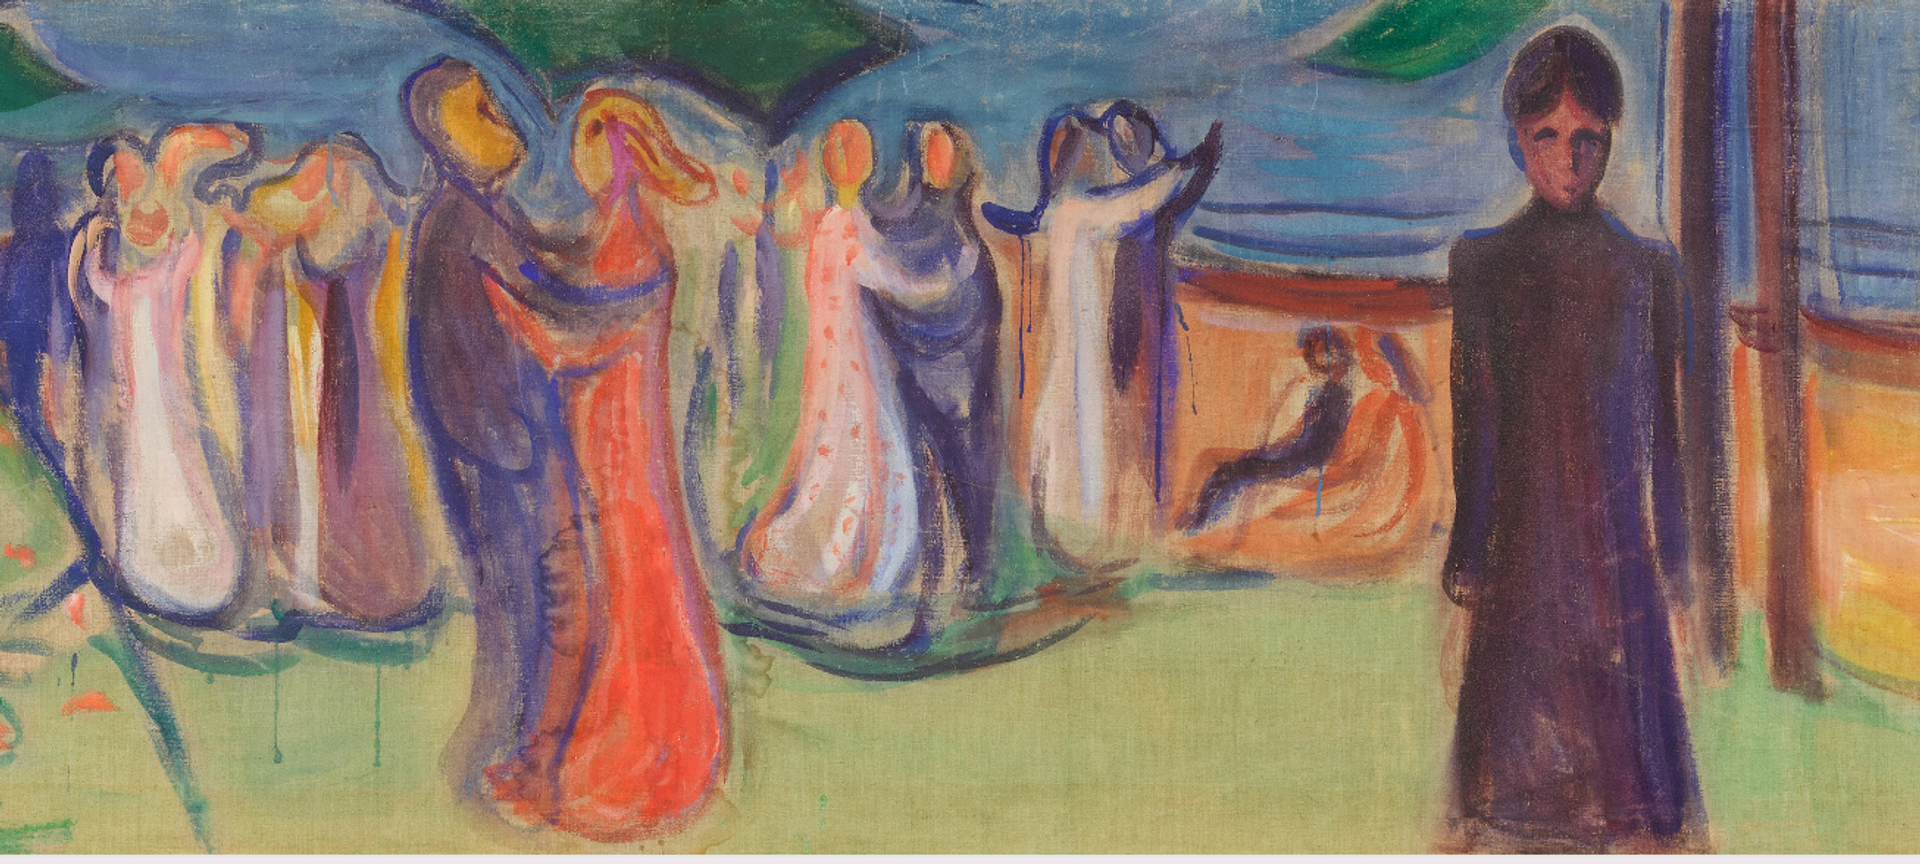 Middle section of Dance on the Beach by Edvard Munch